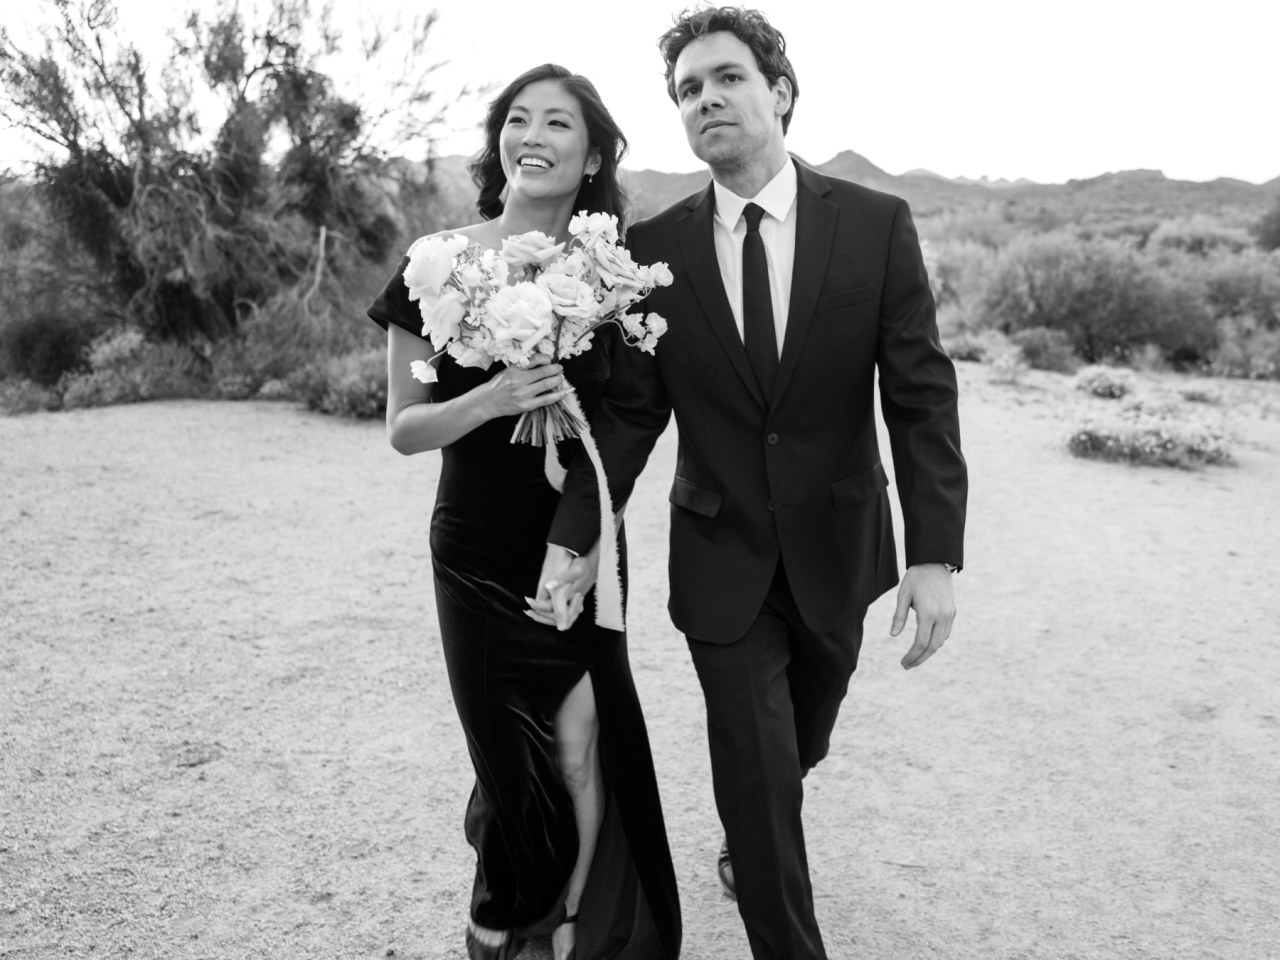 Man and woman holding hands walking in desert landscape. Woman holding bouquet.